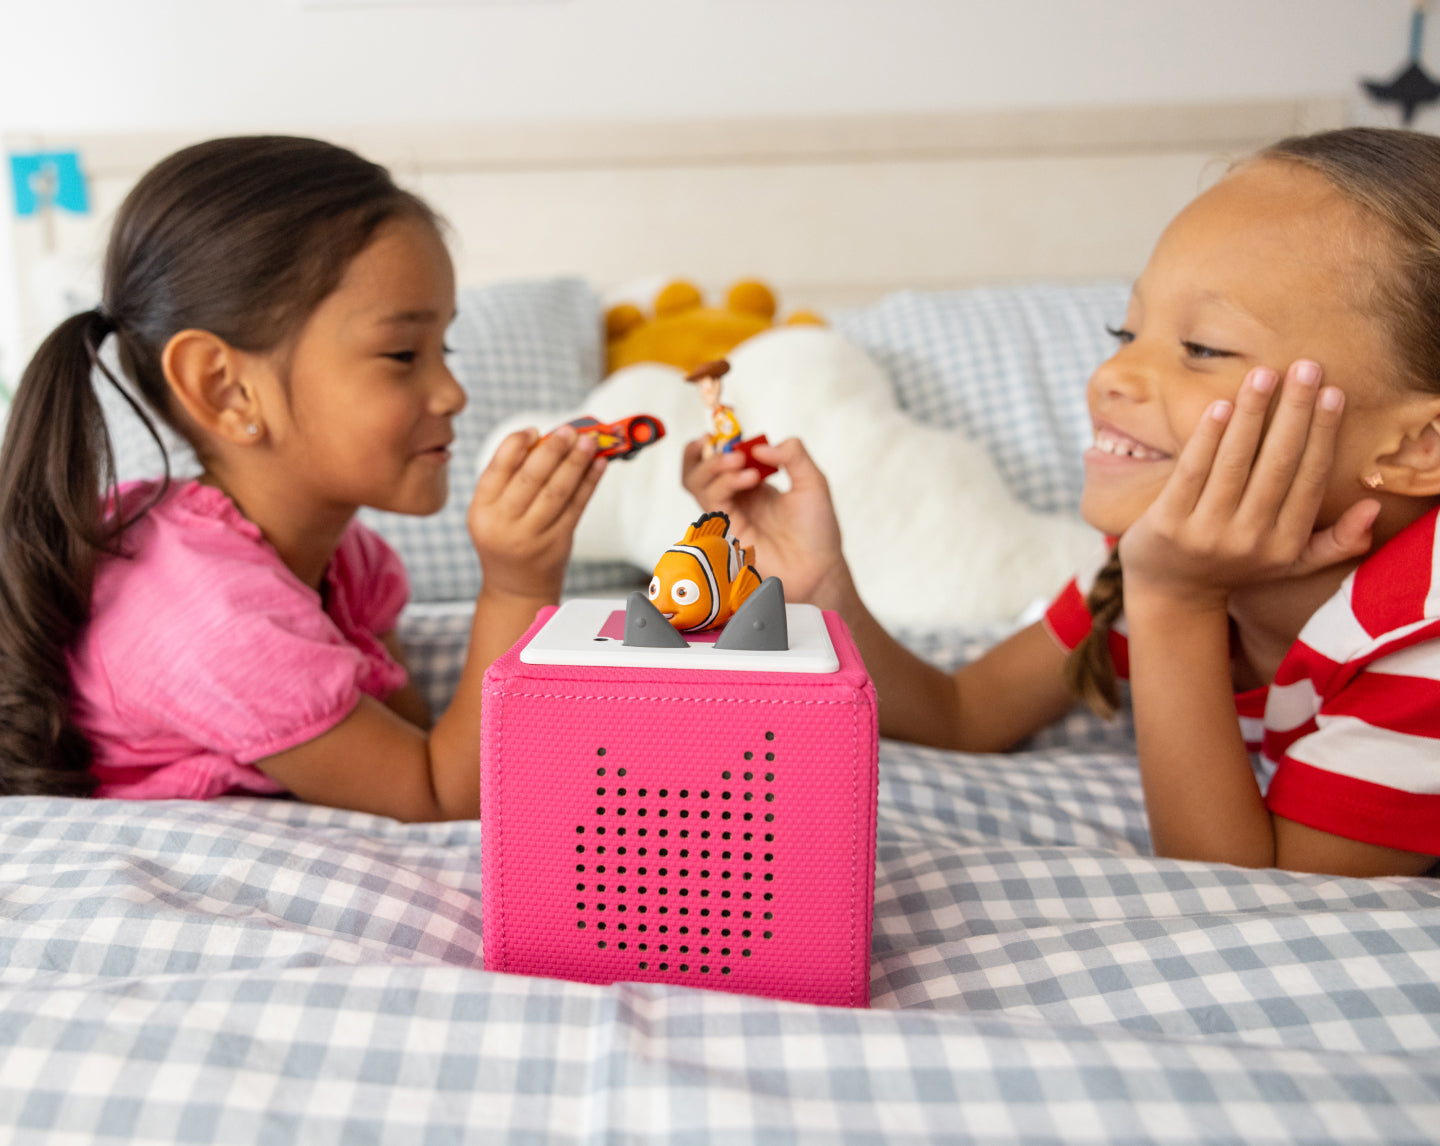 children playing inside with tonies and a pink toniebox